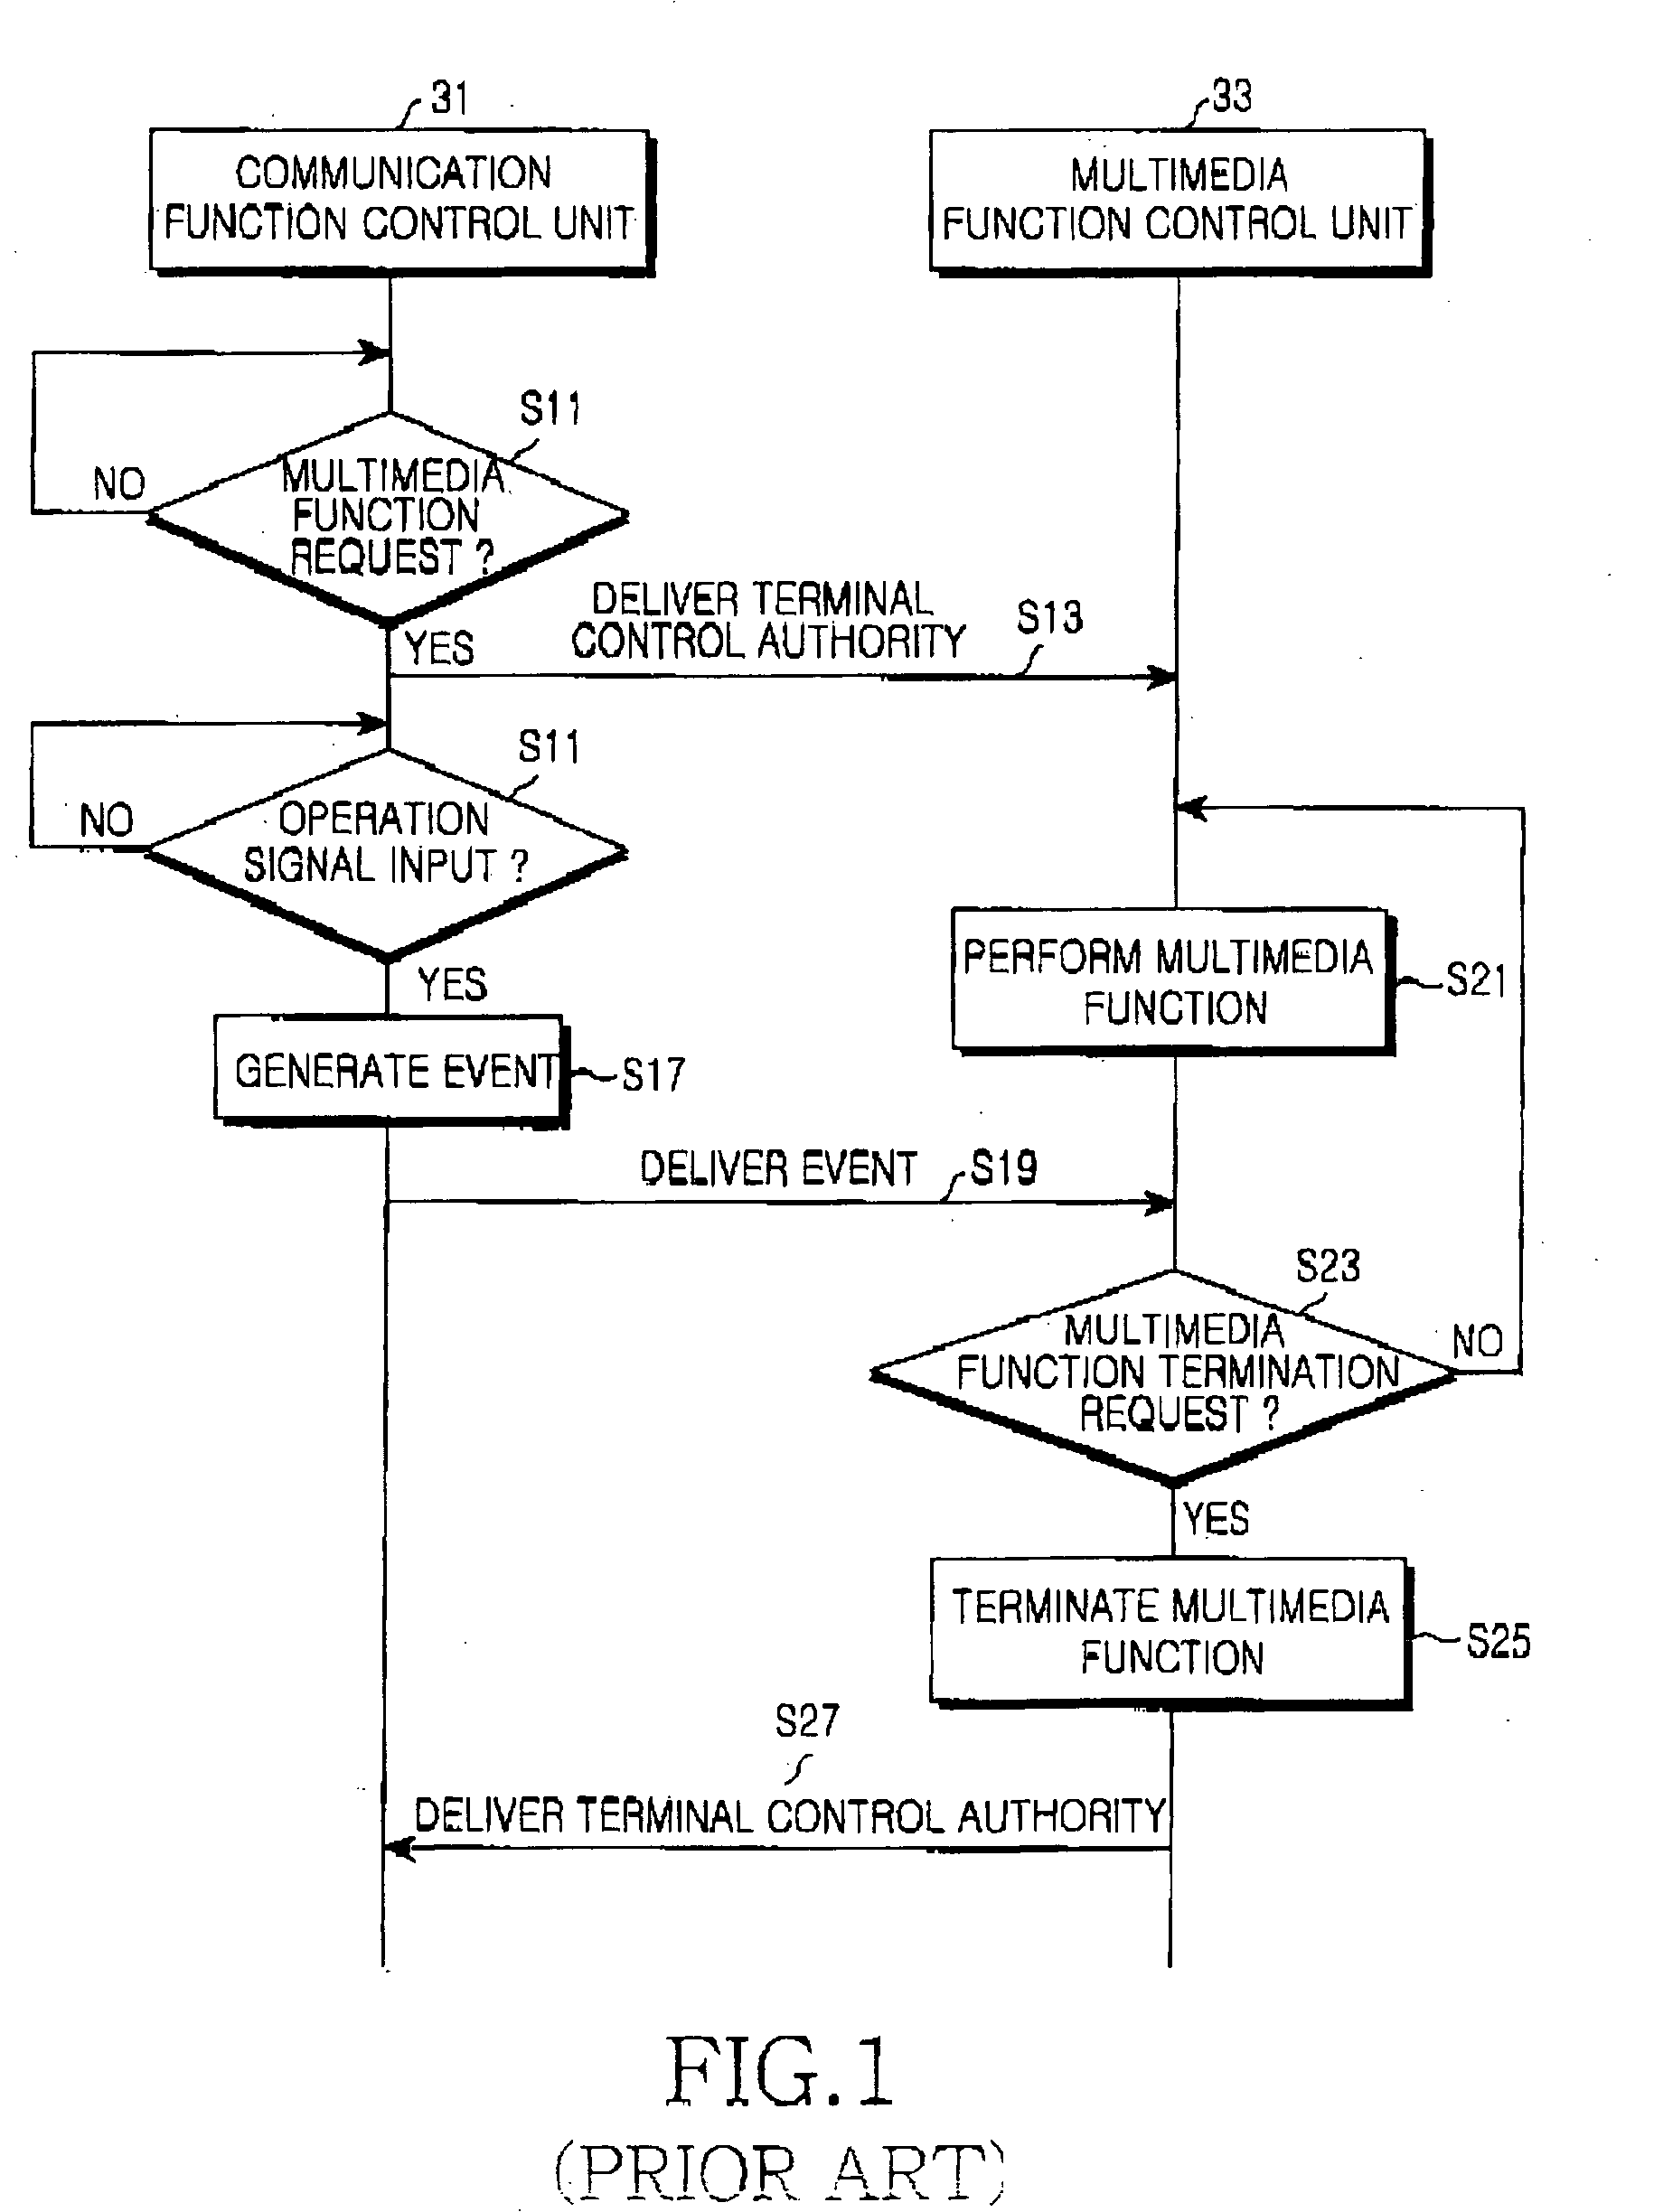 Method and apparatus for performing communication function while performing multimedia function